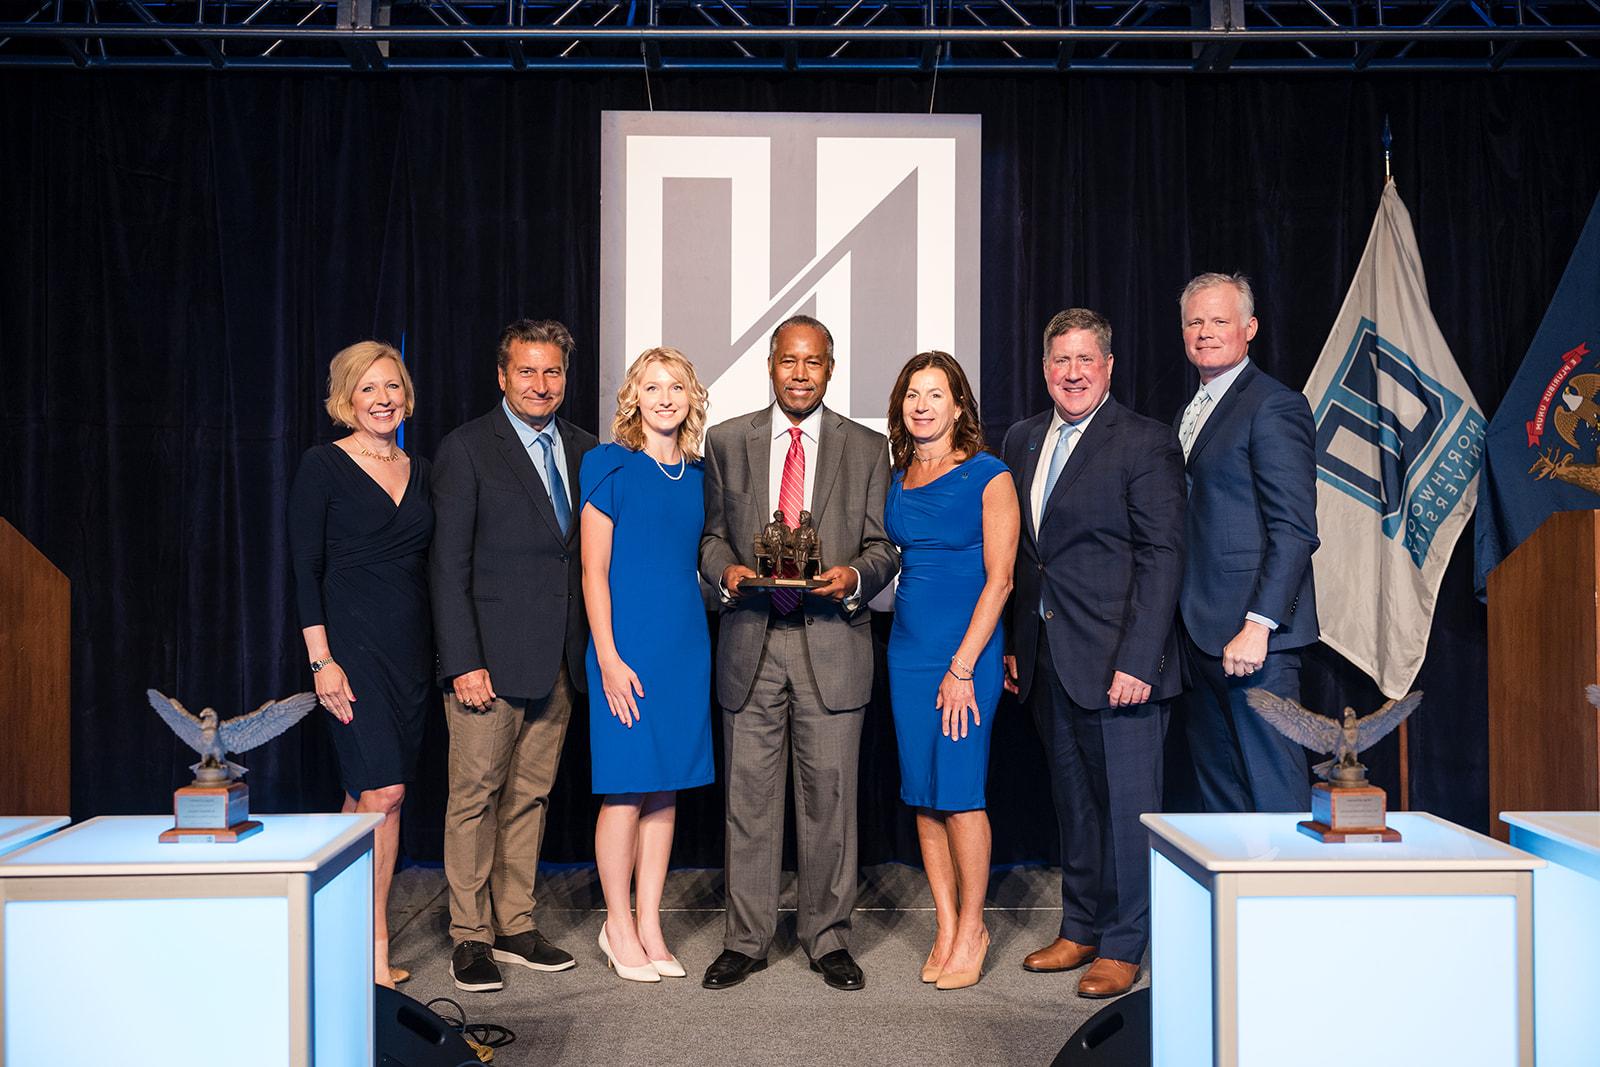 Dr. Benjamin Carson accepting a Wings of Freedom award from the Executive Team at Northwood University